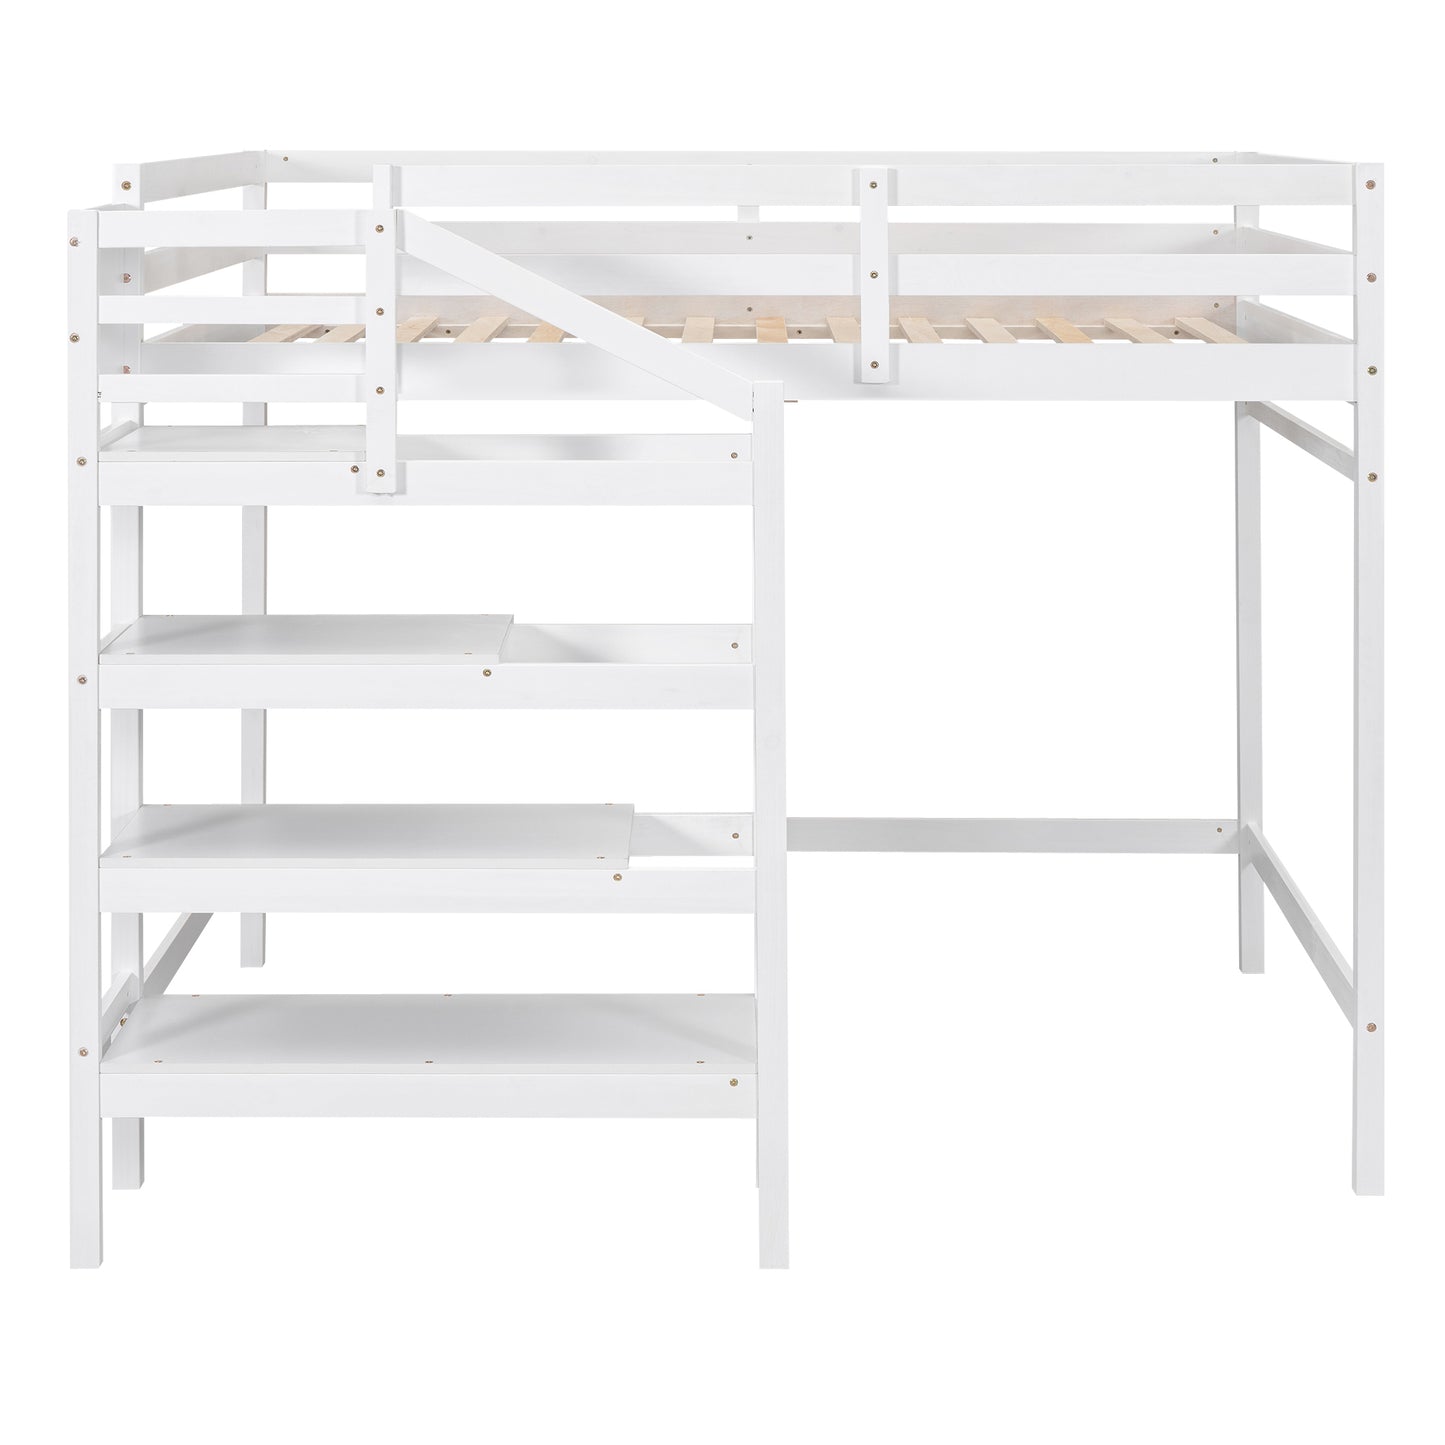 Full Size Loft Bed with Built-in Storage Staircase and Hanger for Clothes, White